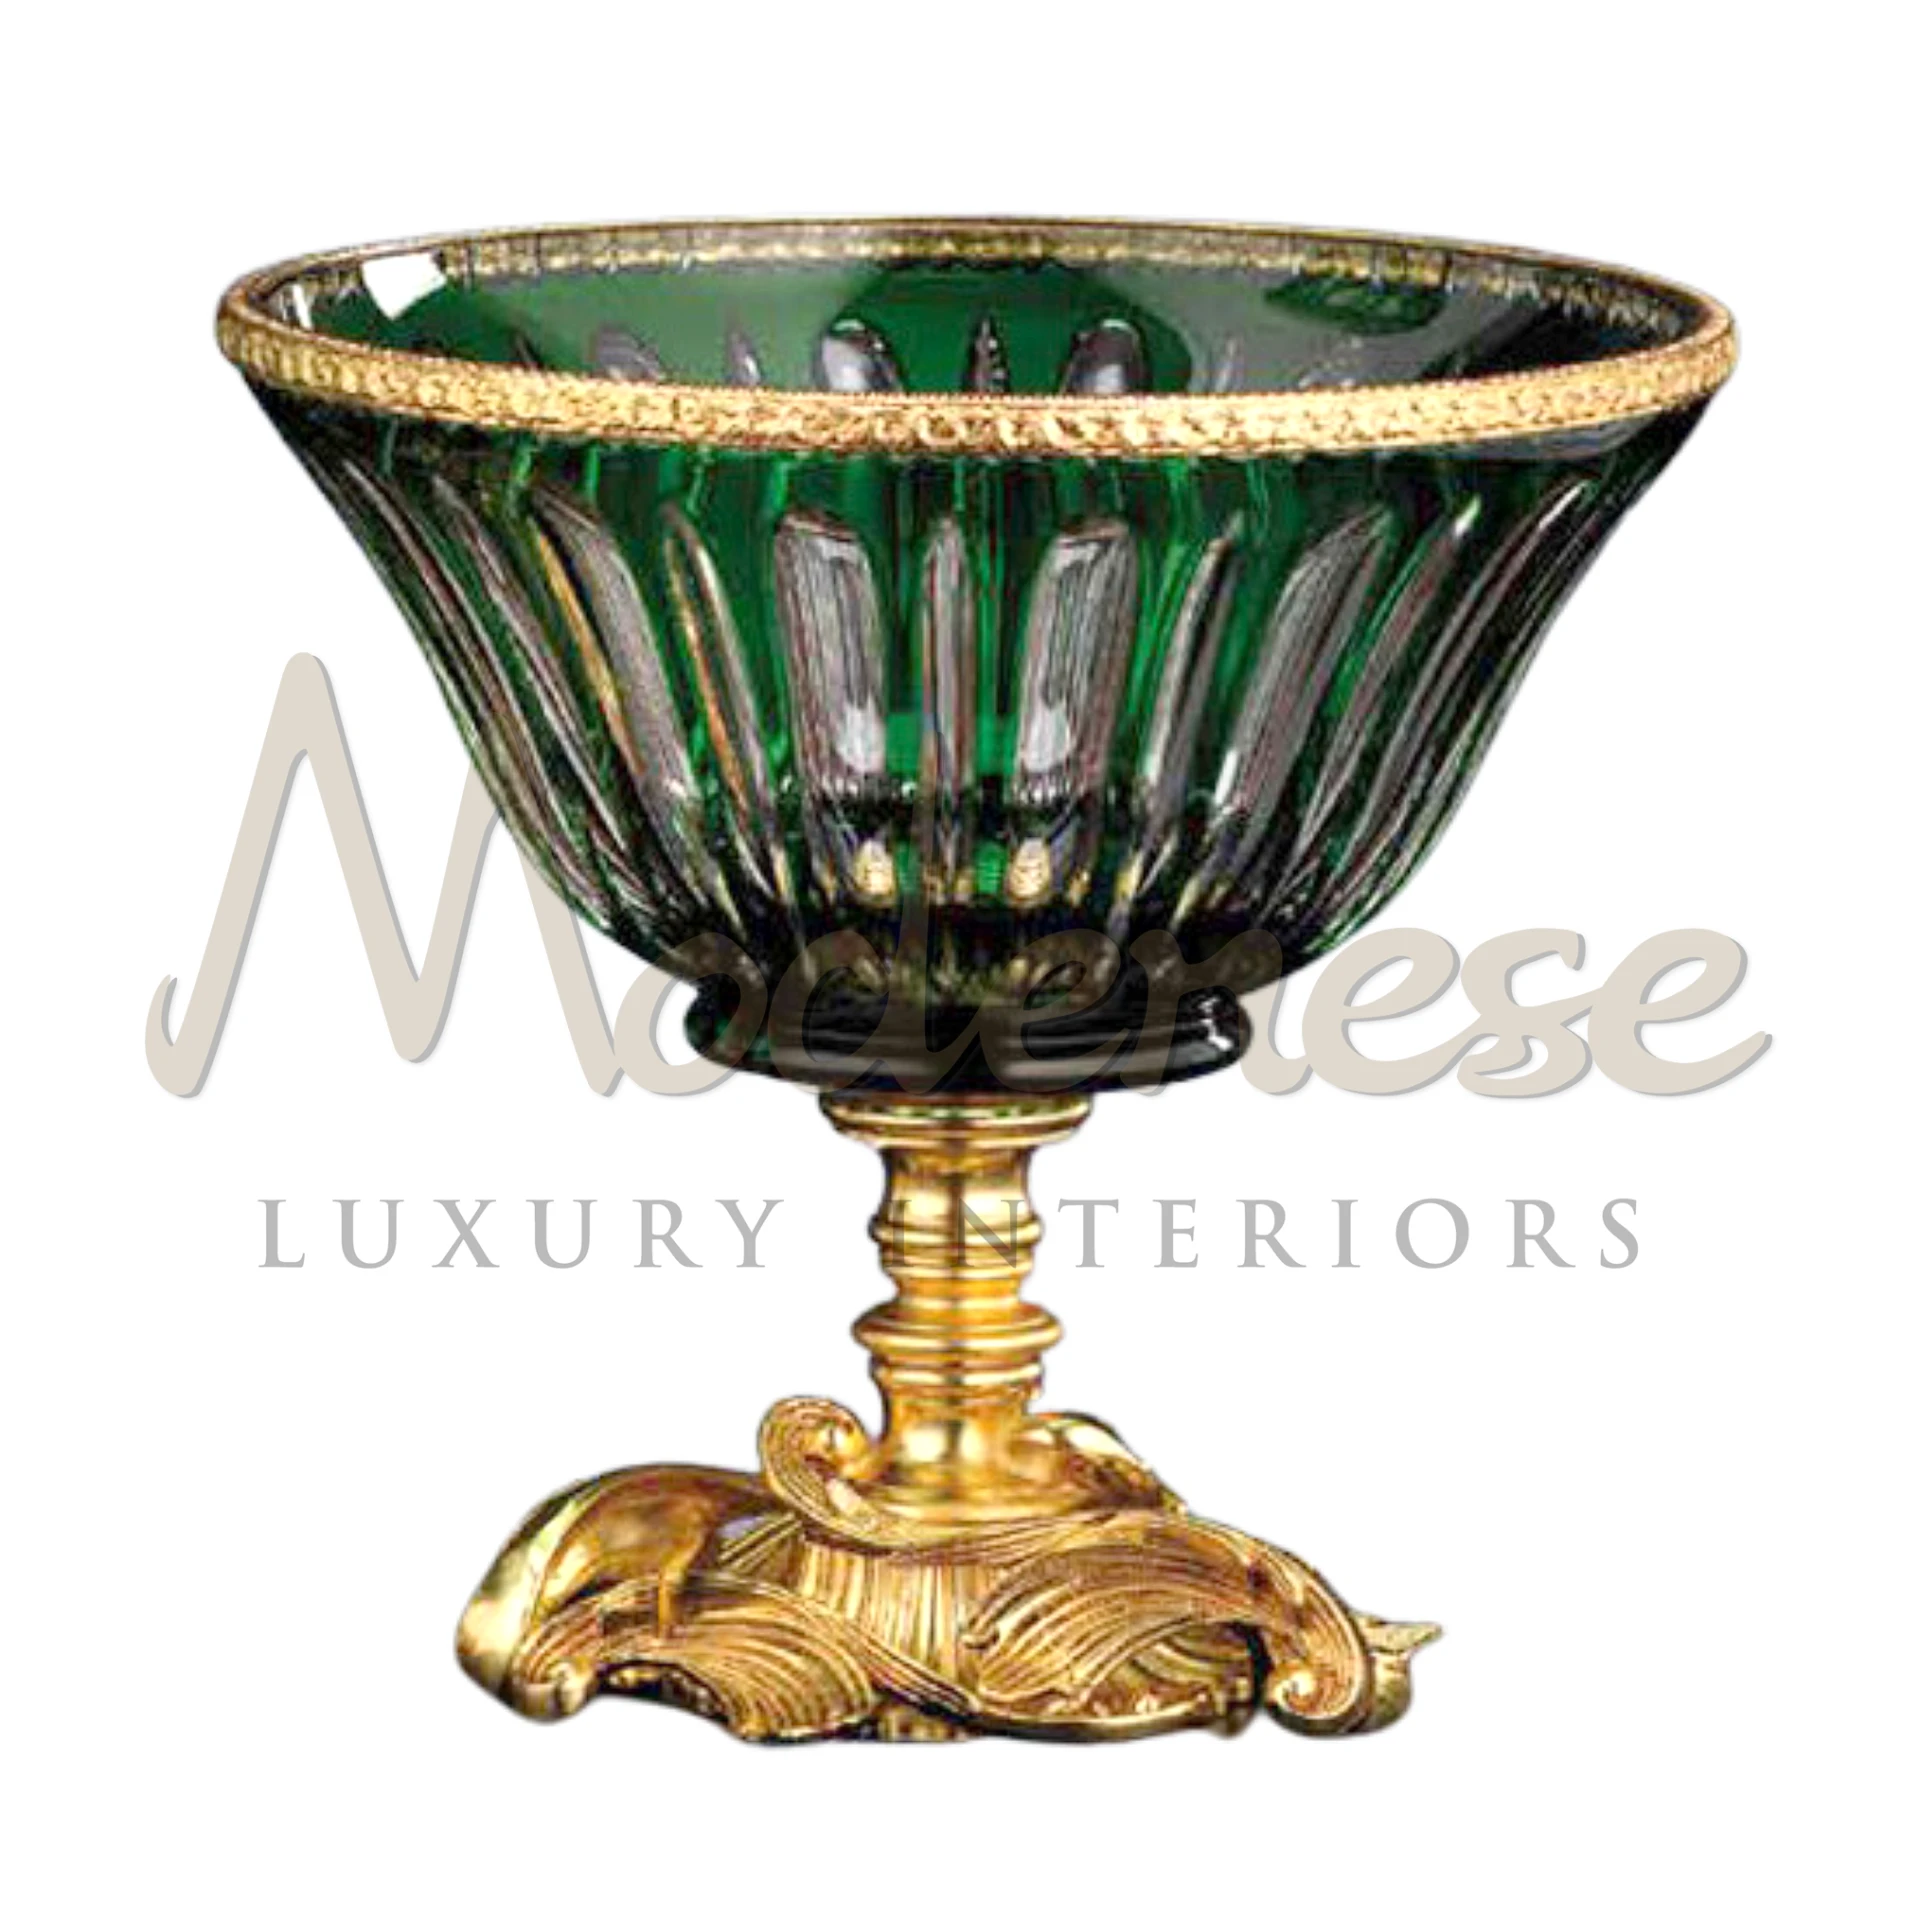 Imperial Green Glass Bowl, embodying royal elegance with its rich green color and high-quality craftsmanship, perfect for enhancing luxury interior designs.